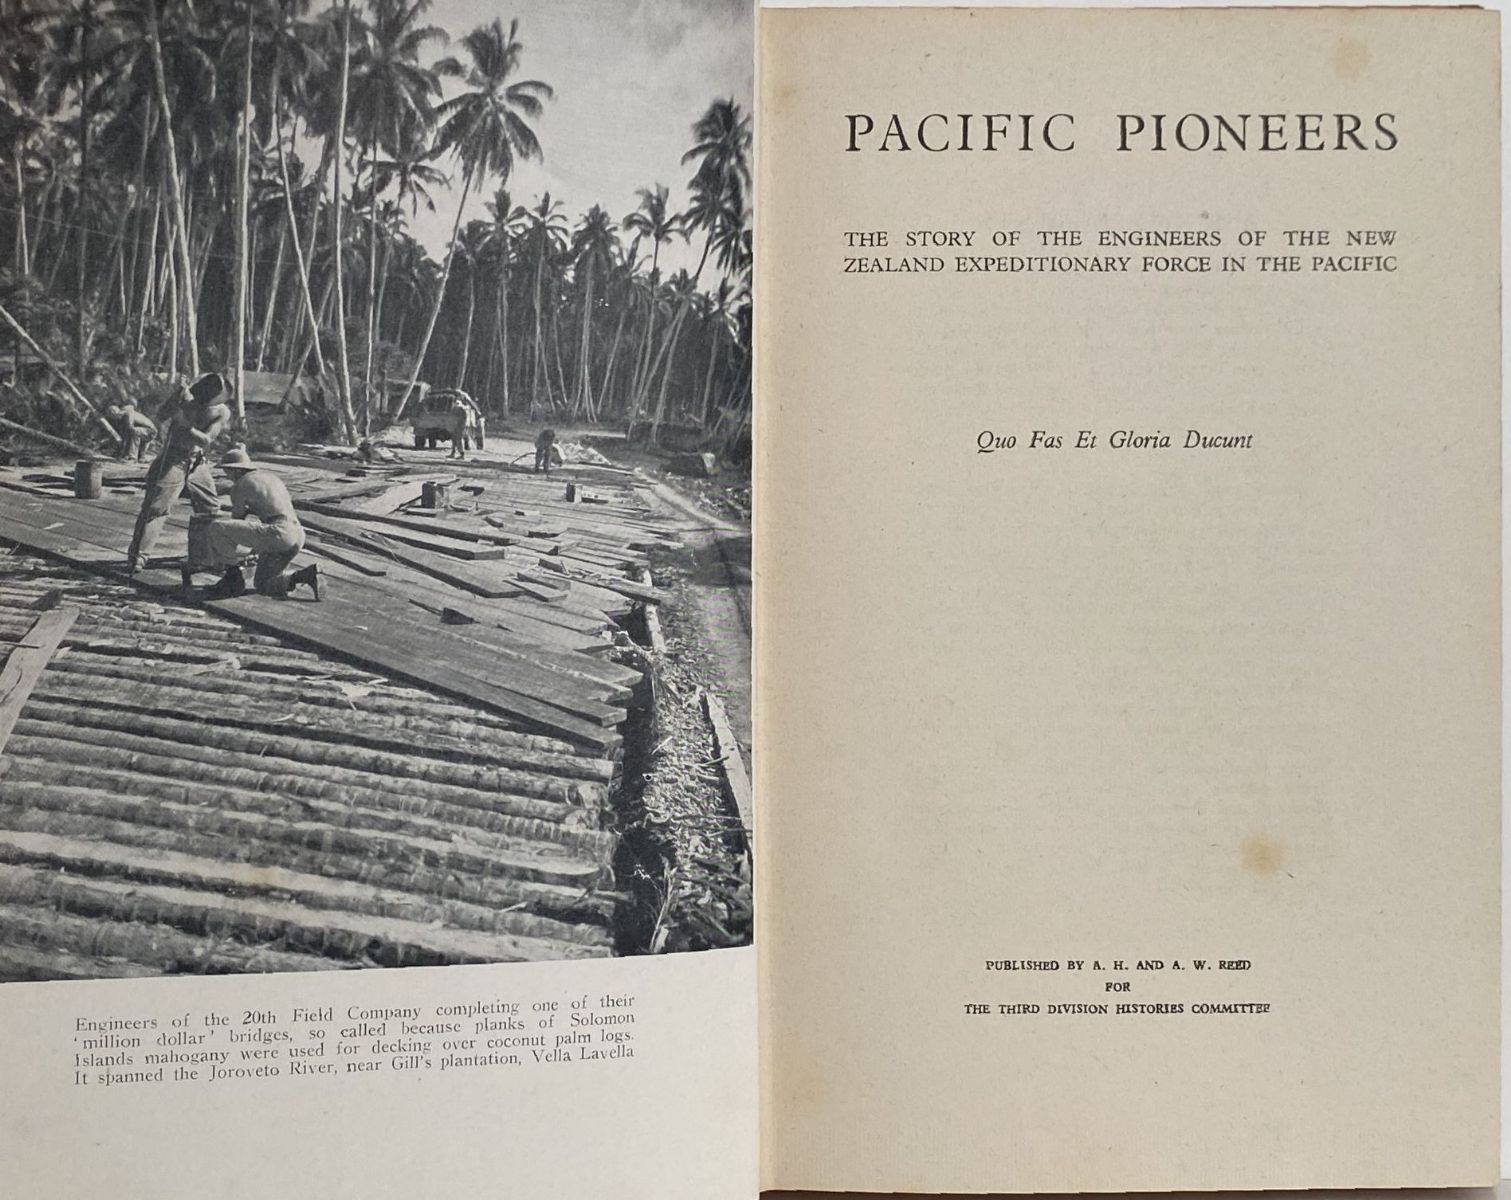 PACIFIC PIONEERS: Engineers of the NZ Expeditionary Force in the Pacific